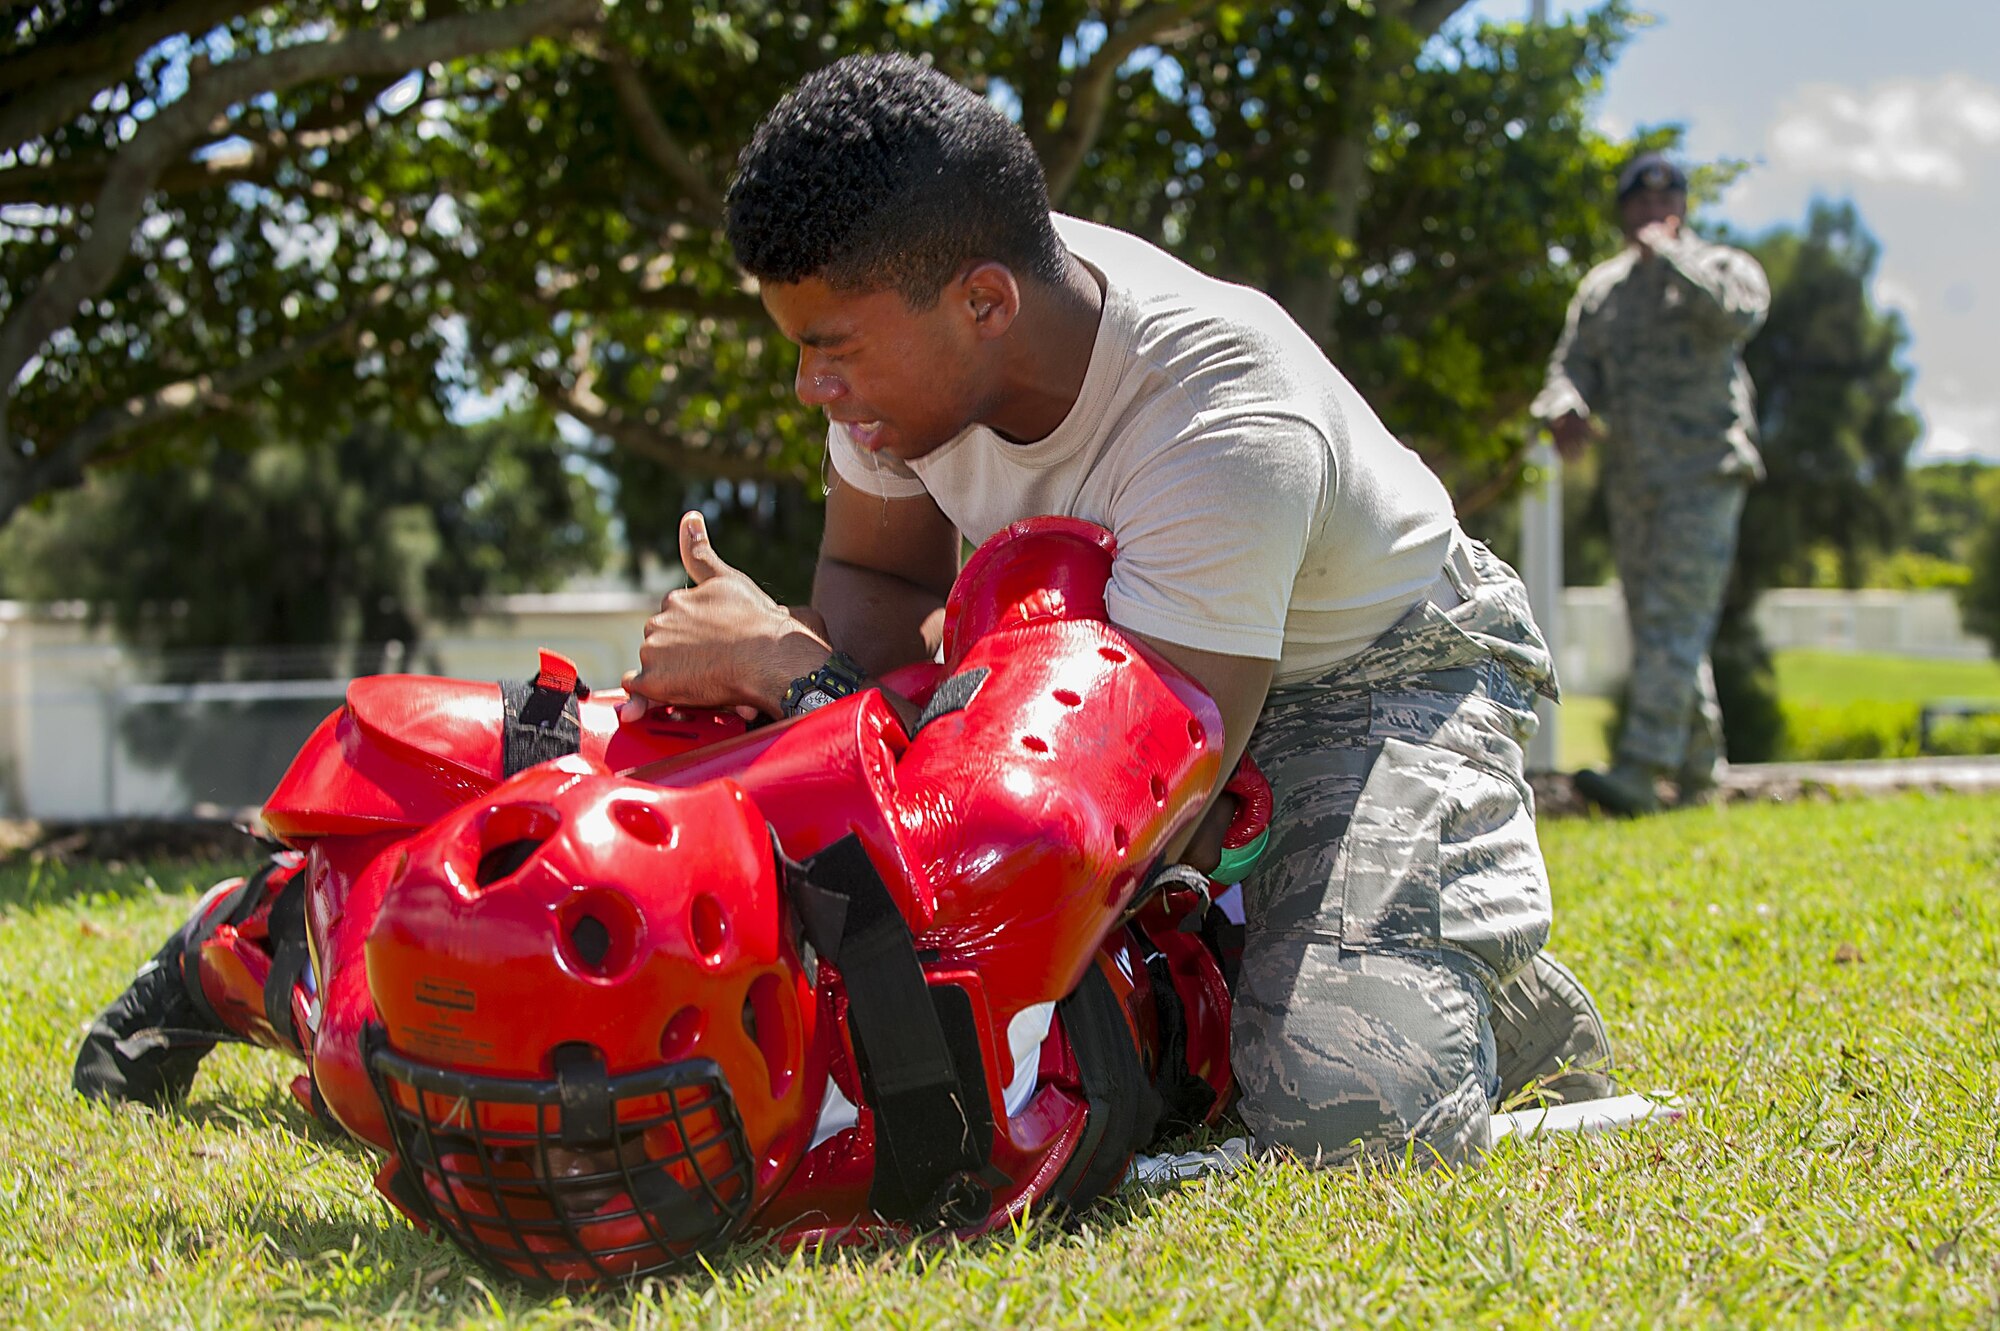 U.S. Air Force Airman 1st Class Zahn Hicks, 18th Security Forces Squadron response force member, takes down an attacker in a red-man suit after being sprayed in the eyes with OC spray during training July 13, 2016, at Kadena Air Base, Japan. Security forces member have to be ready for any situation, including being sprayed with OC spray and still having to fight back and subdue an attacker. (U.S. Air Force photo by Airman 1st Class Corey M. Pettis)